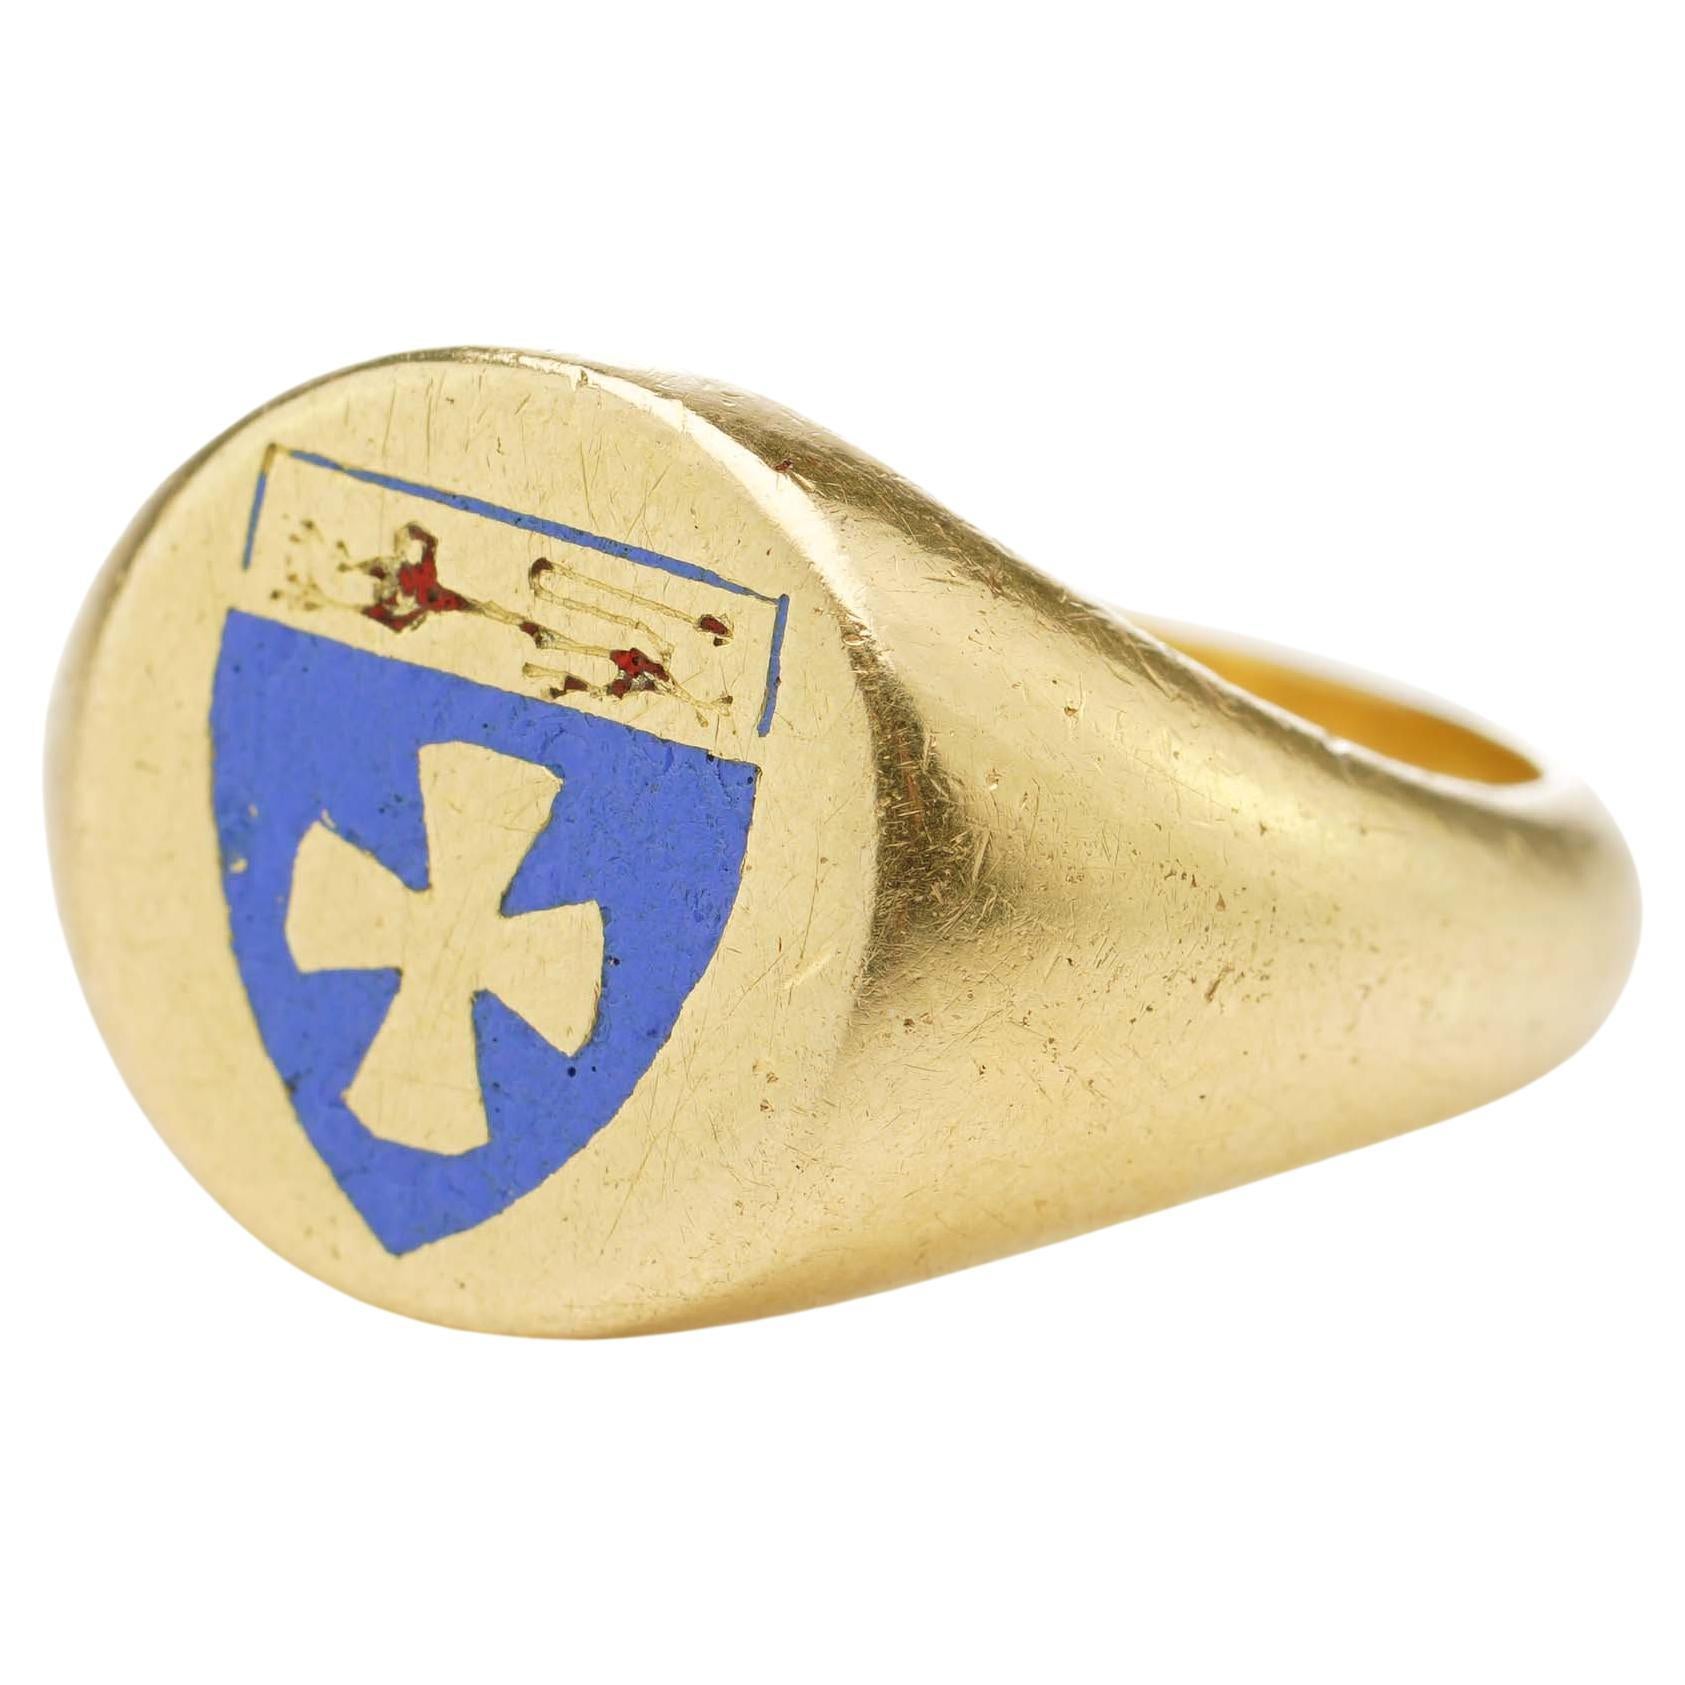 Antique 18kt. yellow gold signet ring with coat of arms and Delta Tau Delta symbol. 
The coat of arms features a shield with a lion rampant and cross pattée. 

The cross pattée (or cross patty, also known as a cross formée/formy, Croix pattée or